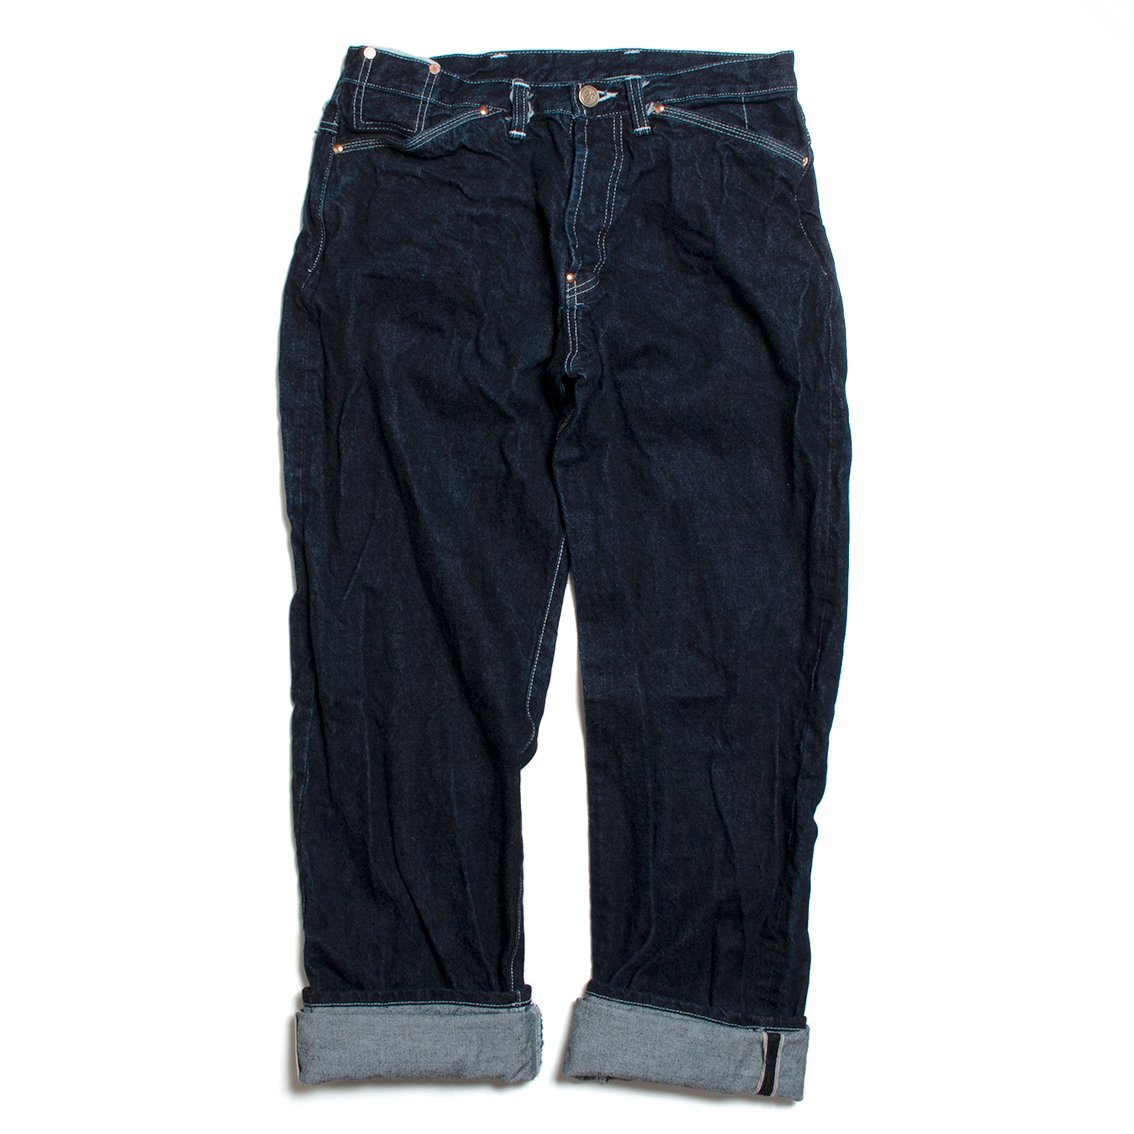 TENDER Co. / テンダー] TYPE 132 RINCE WIDE JEANS ワイド デニム ...